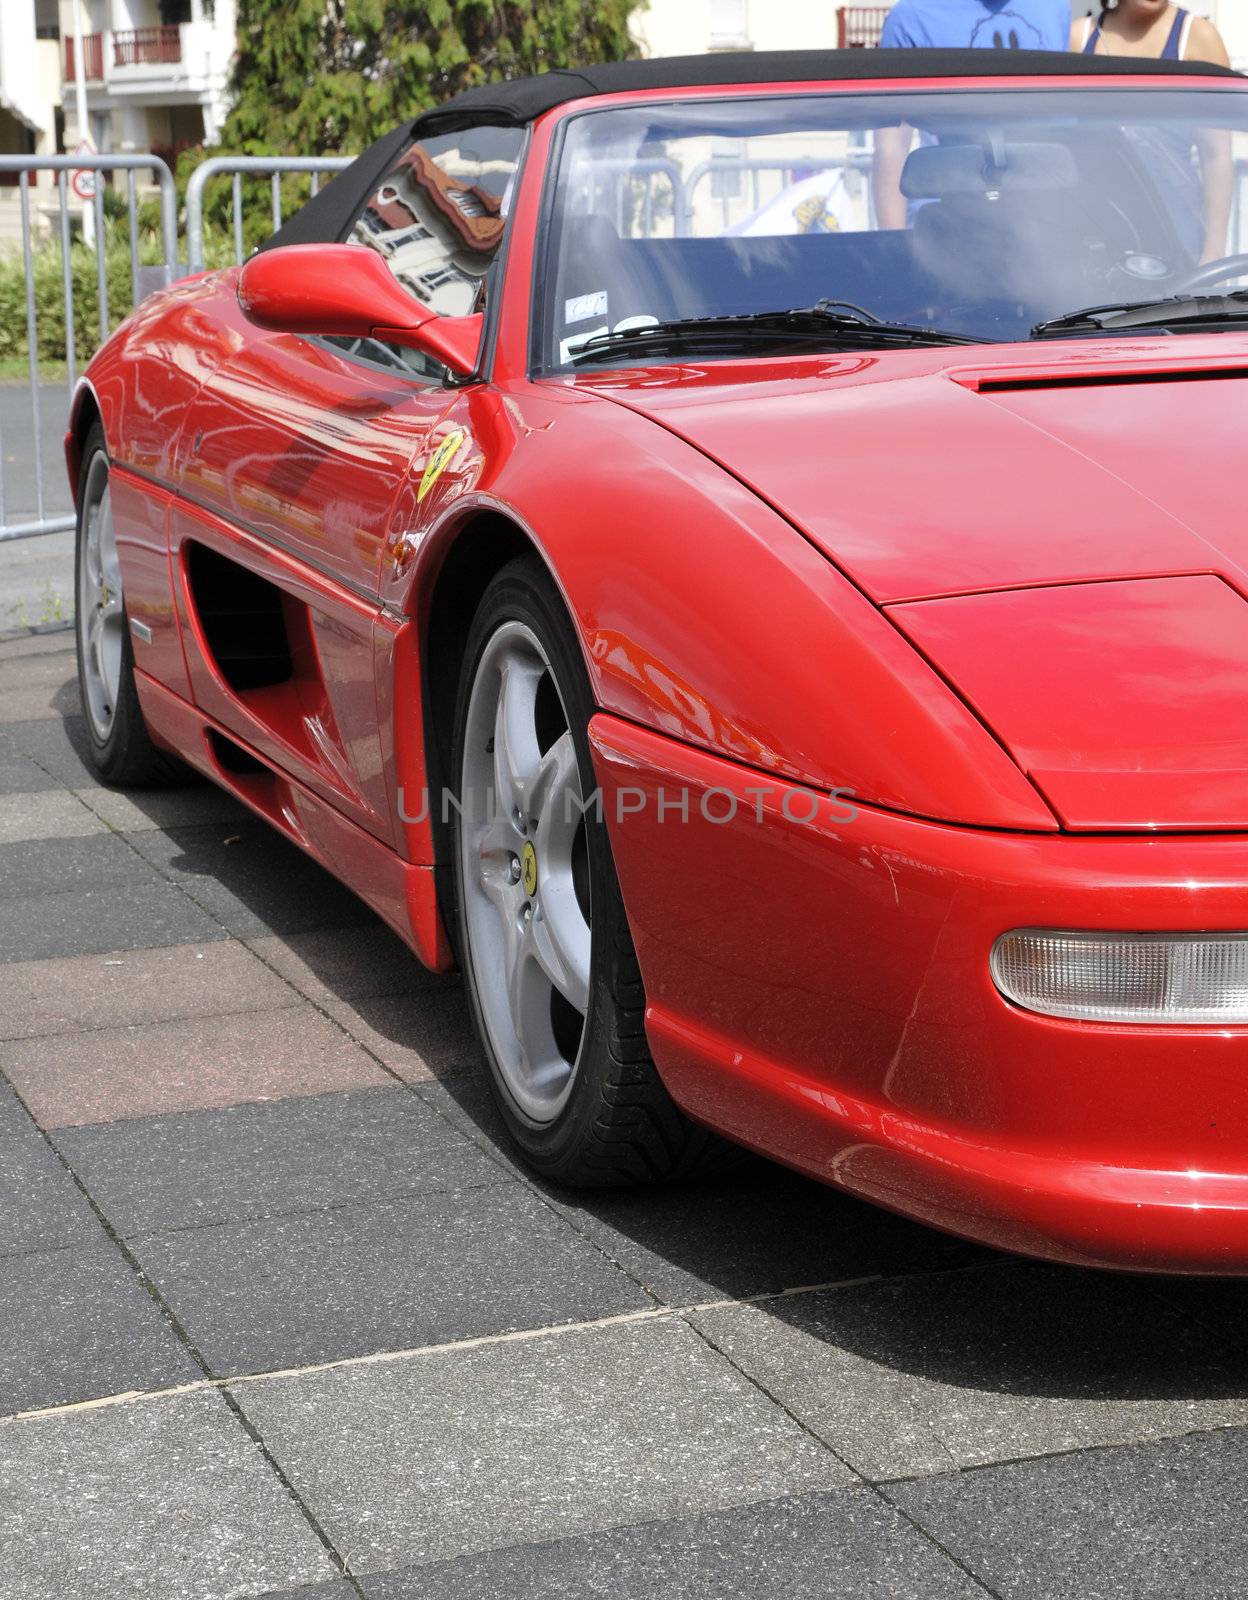 Right view of a F355 Ferrari during a meeting